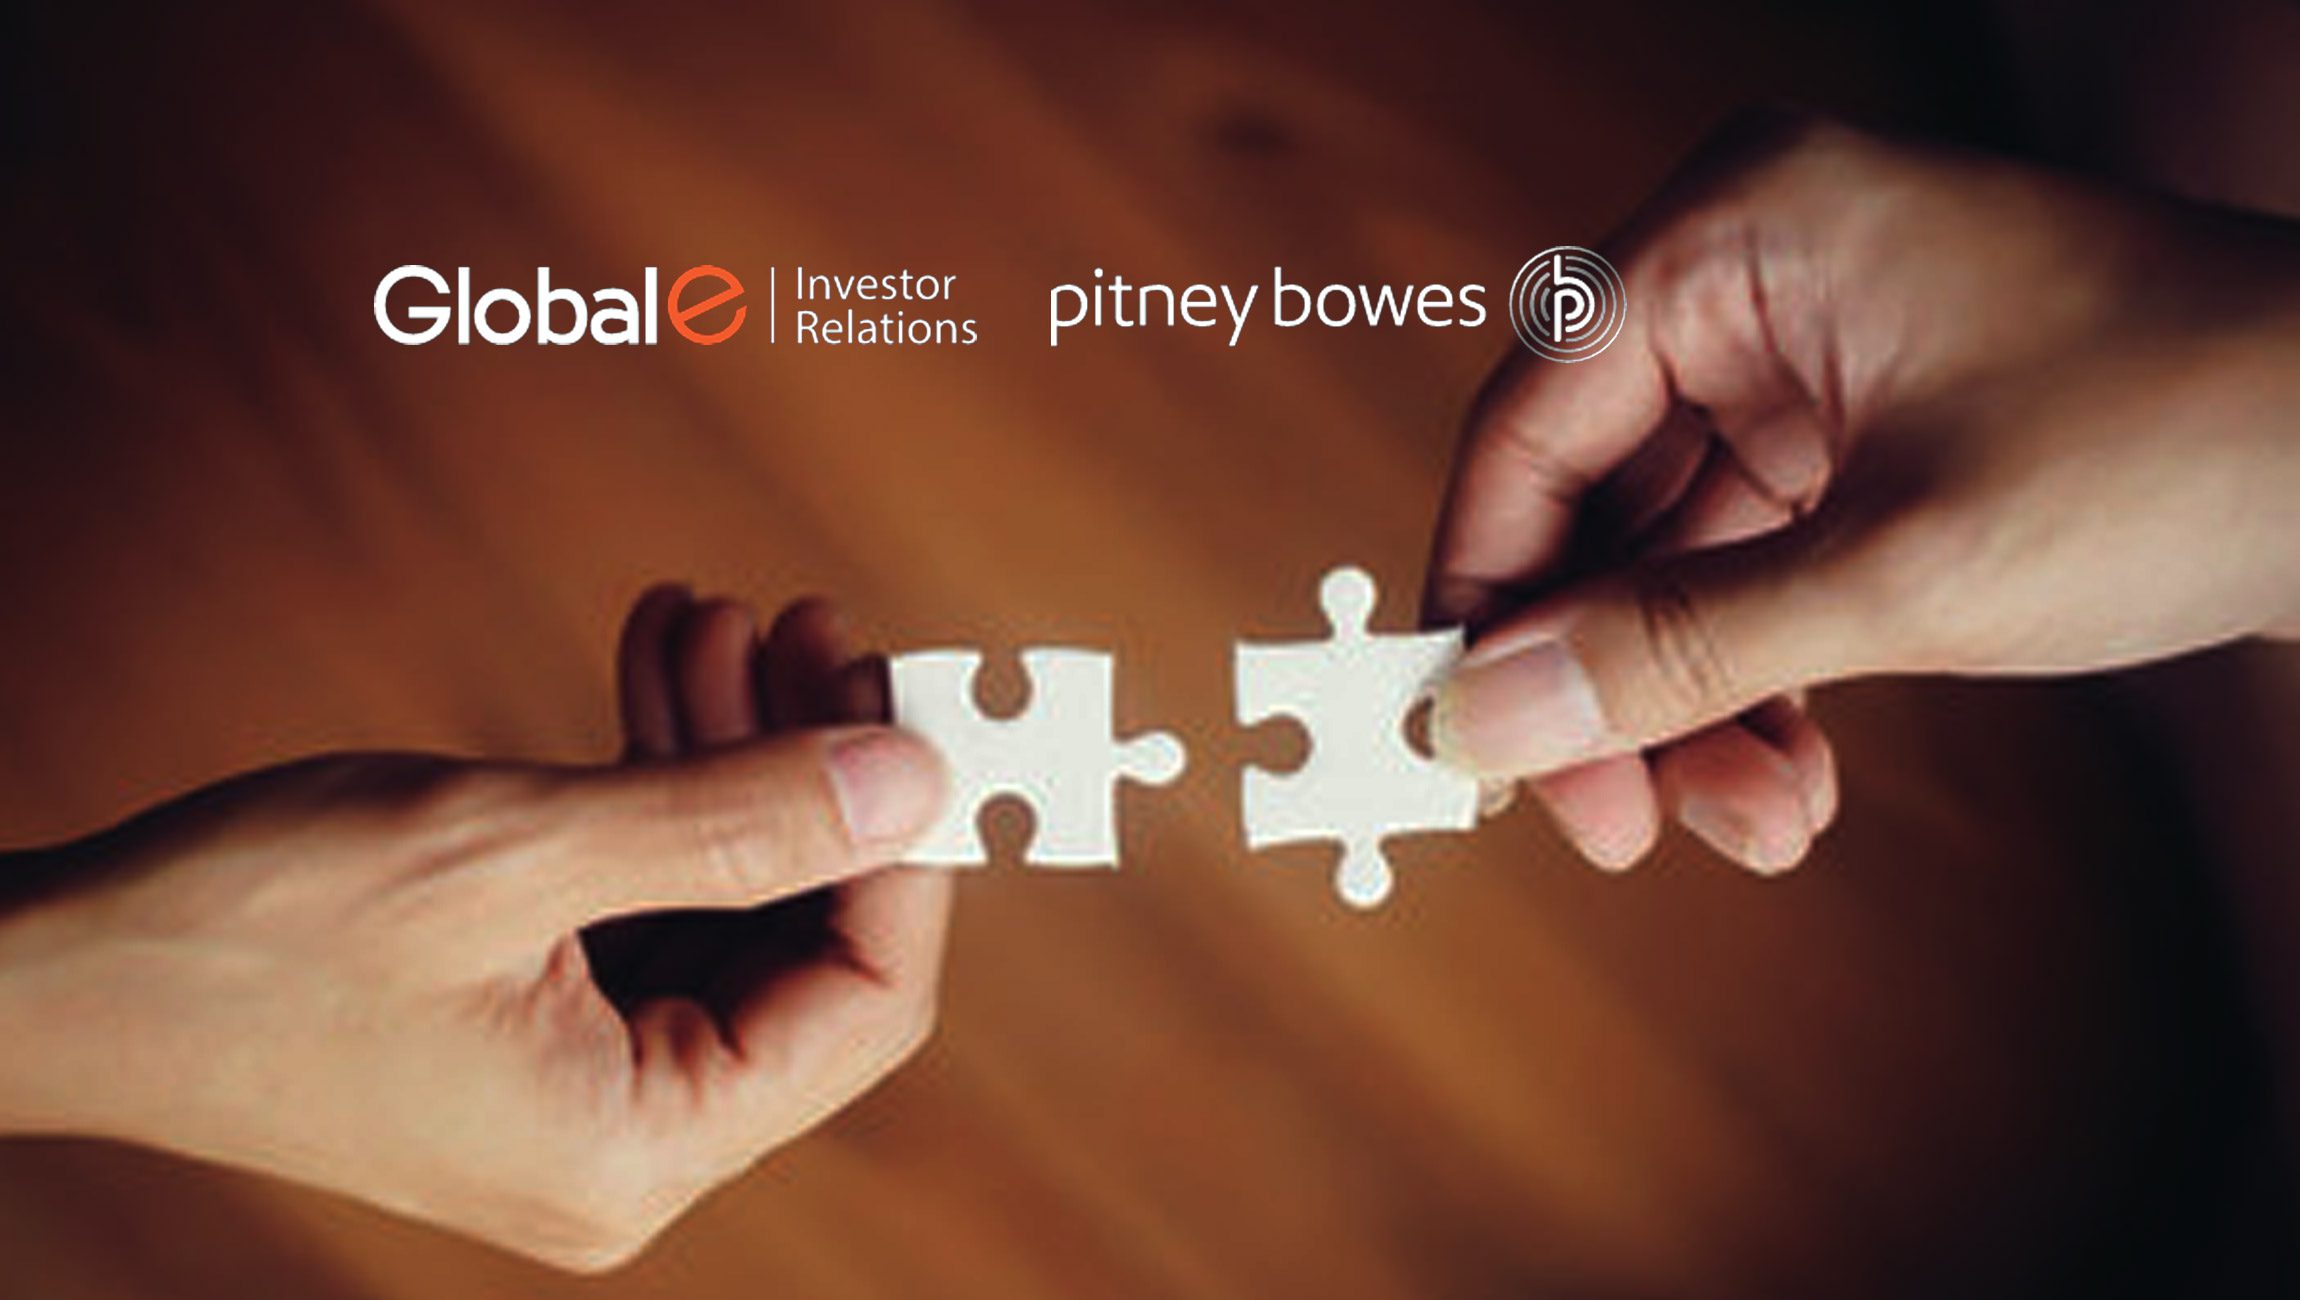 Global-e Announces Closing of Acquisition of Borderfree Cross-Border ecommerce Service from Pitney Bowes